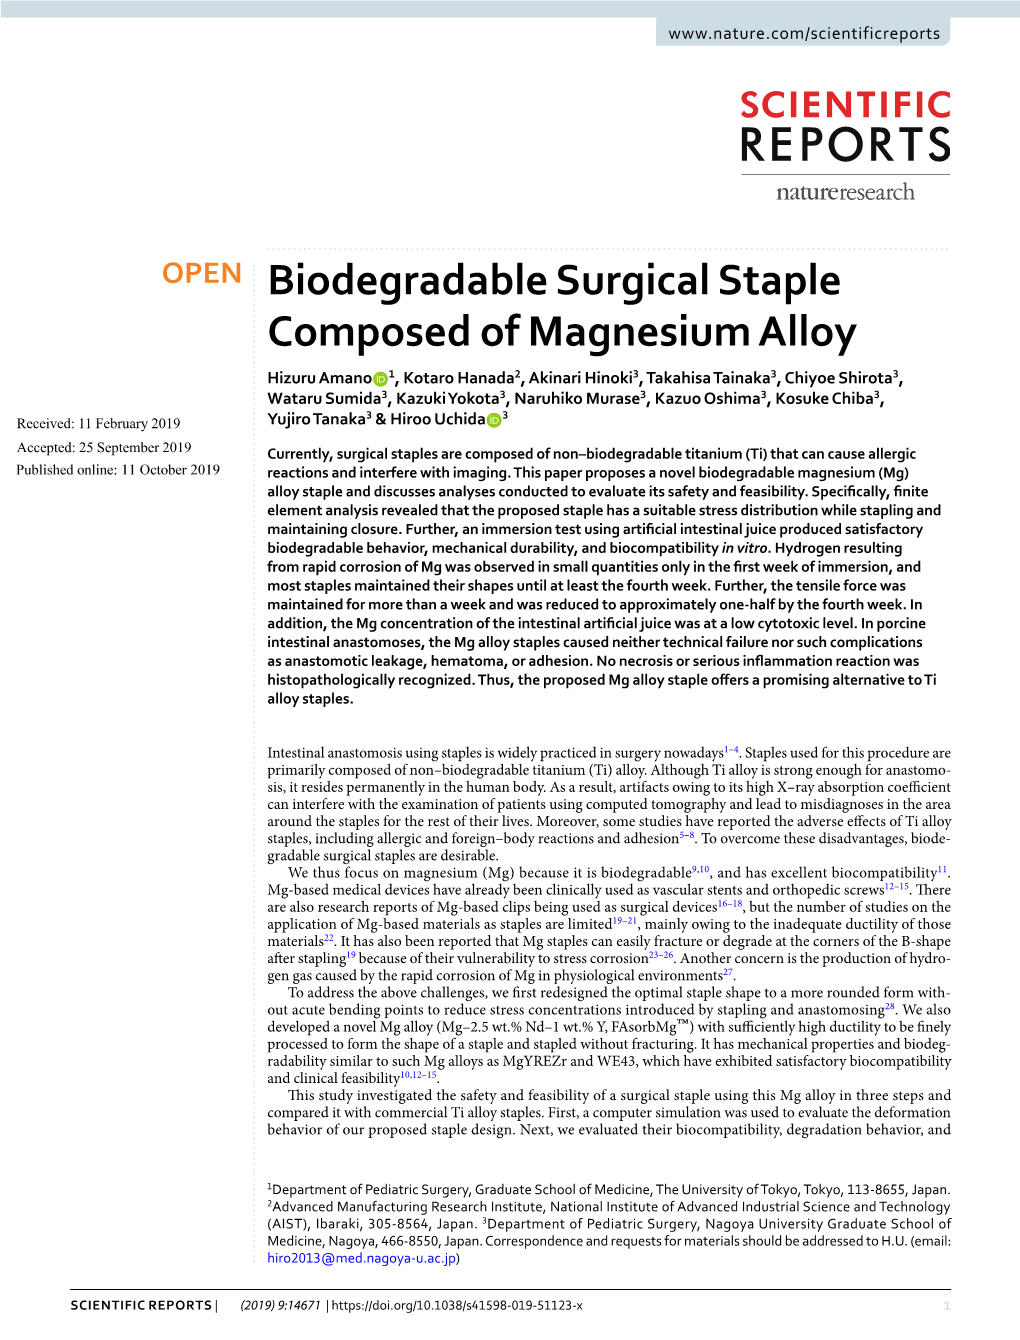 Biodegradable Surgical Staple Composed of Magnesium Alloy